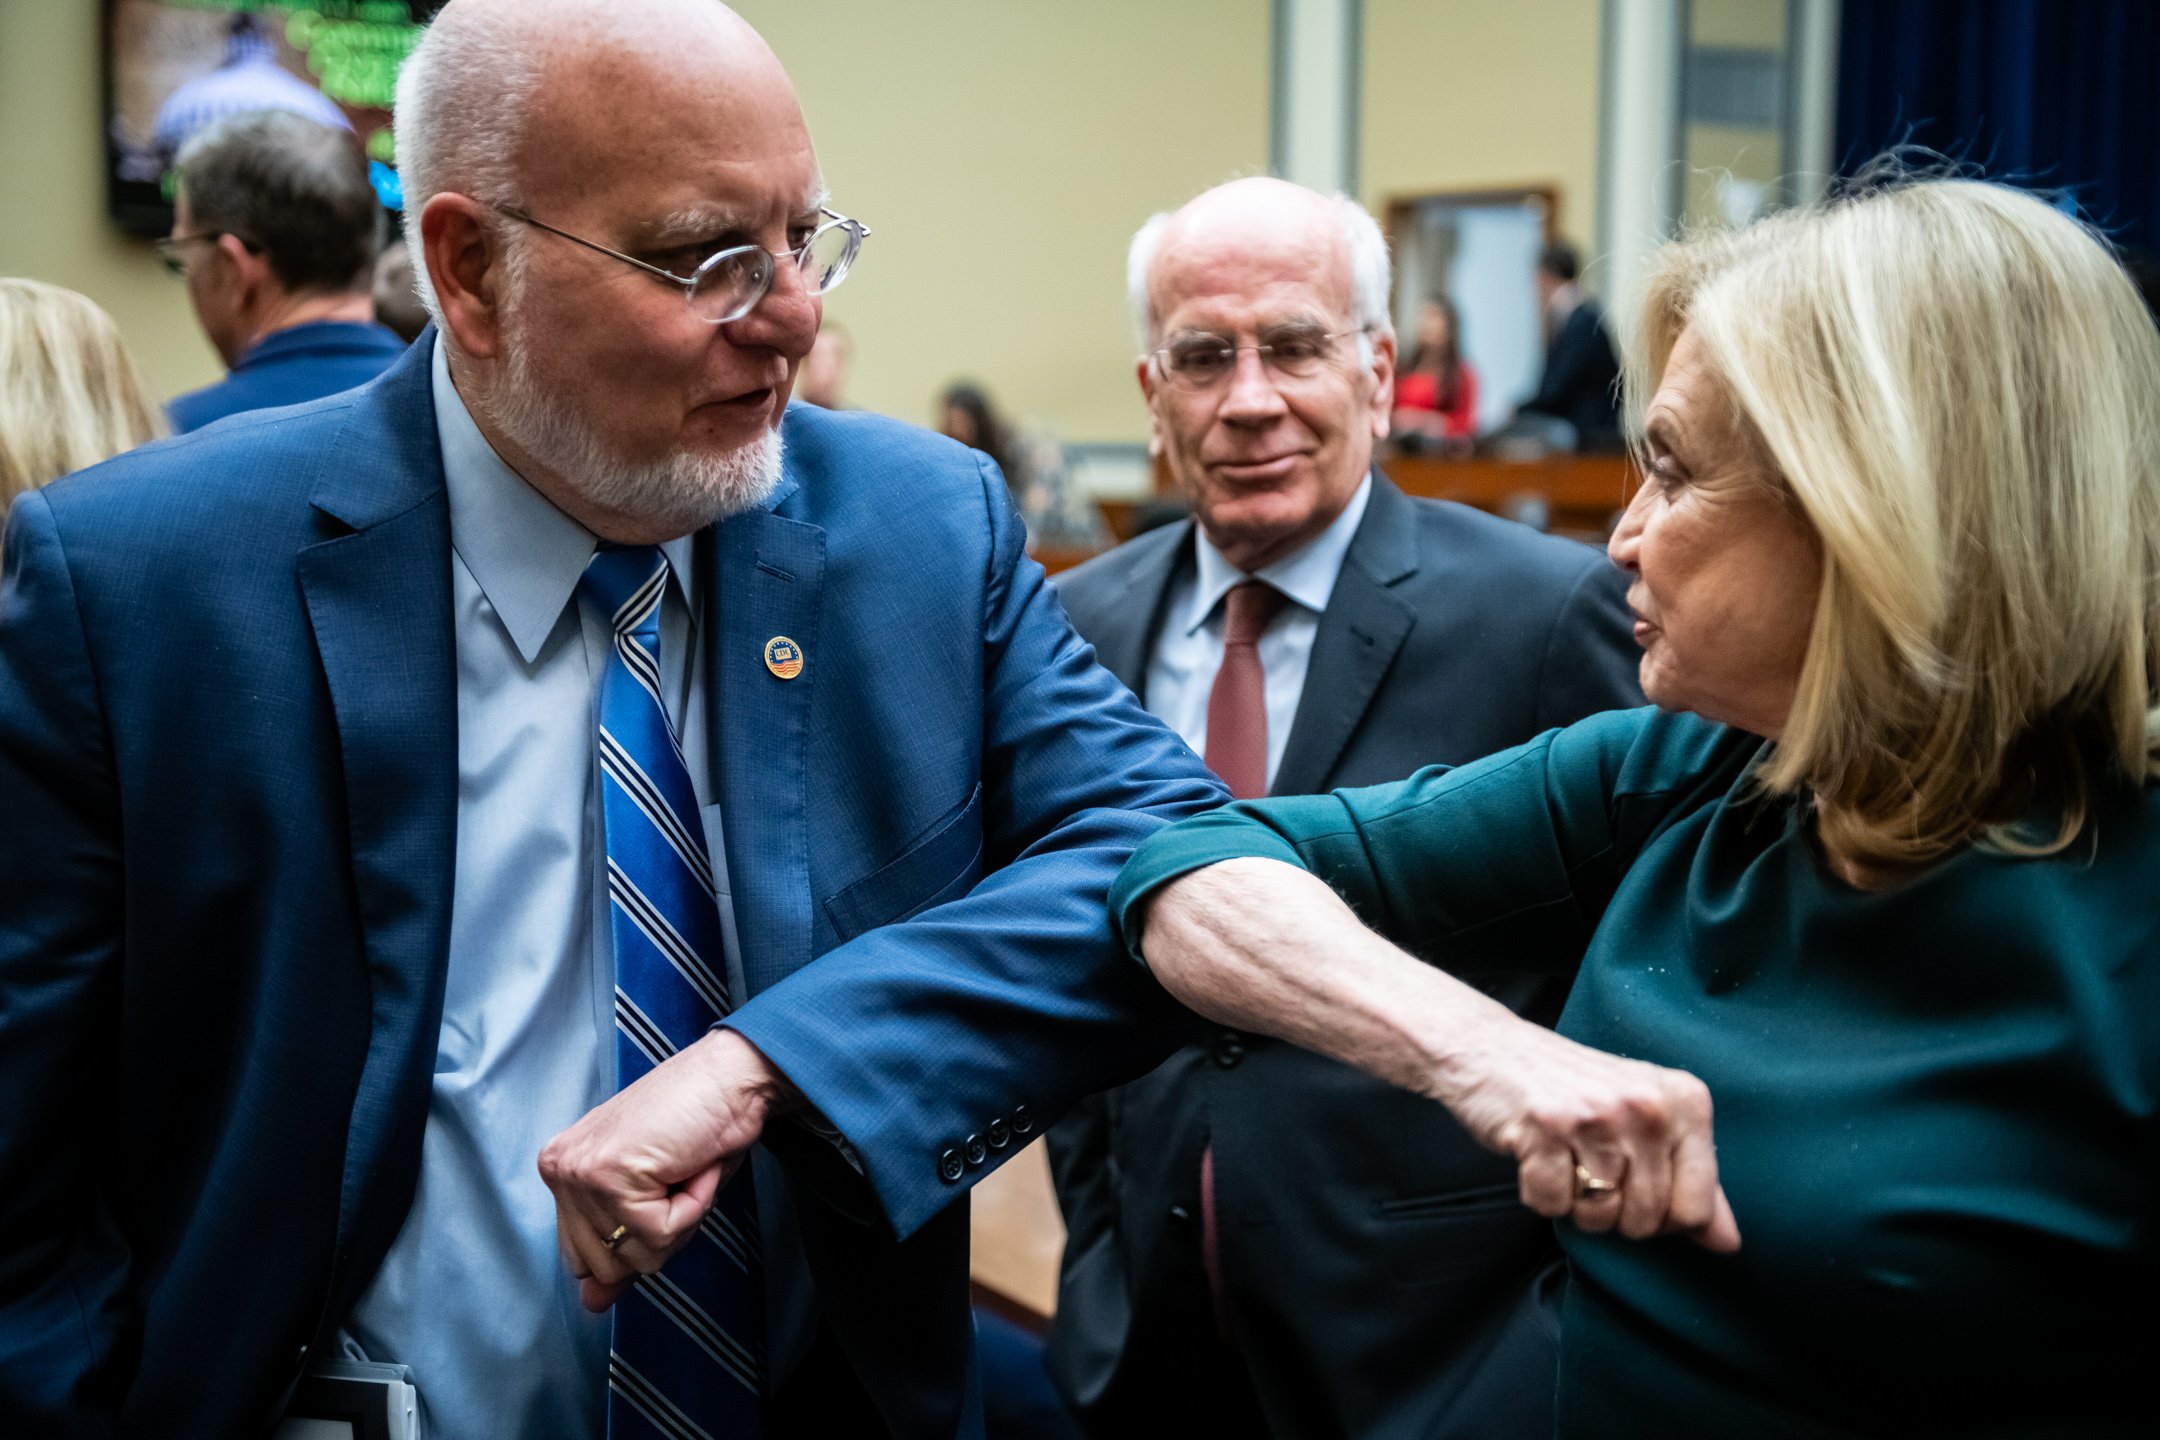  CDC Director Robert Redfield, left, elbow bumps Representative Carolyn Maloney (D-N.Y.), Committee Chair, right, after an emergency House Oversight Committee Hearing on the emerging COVID-19 outbreak, at the U.S. Capitol, in Washington, D.C., on Mar